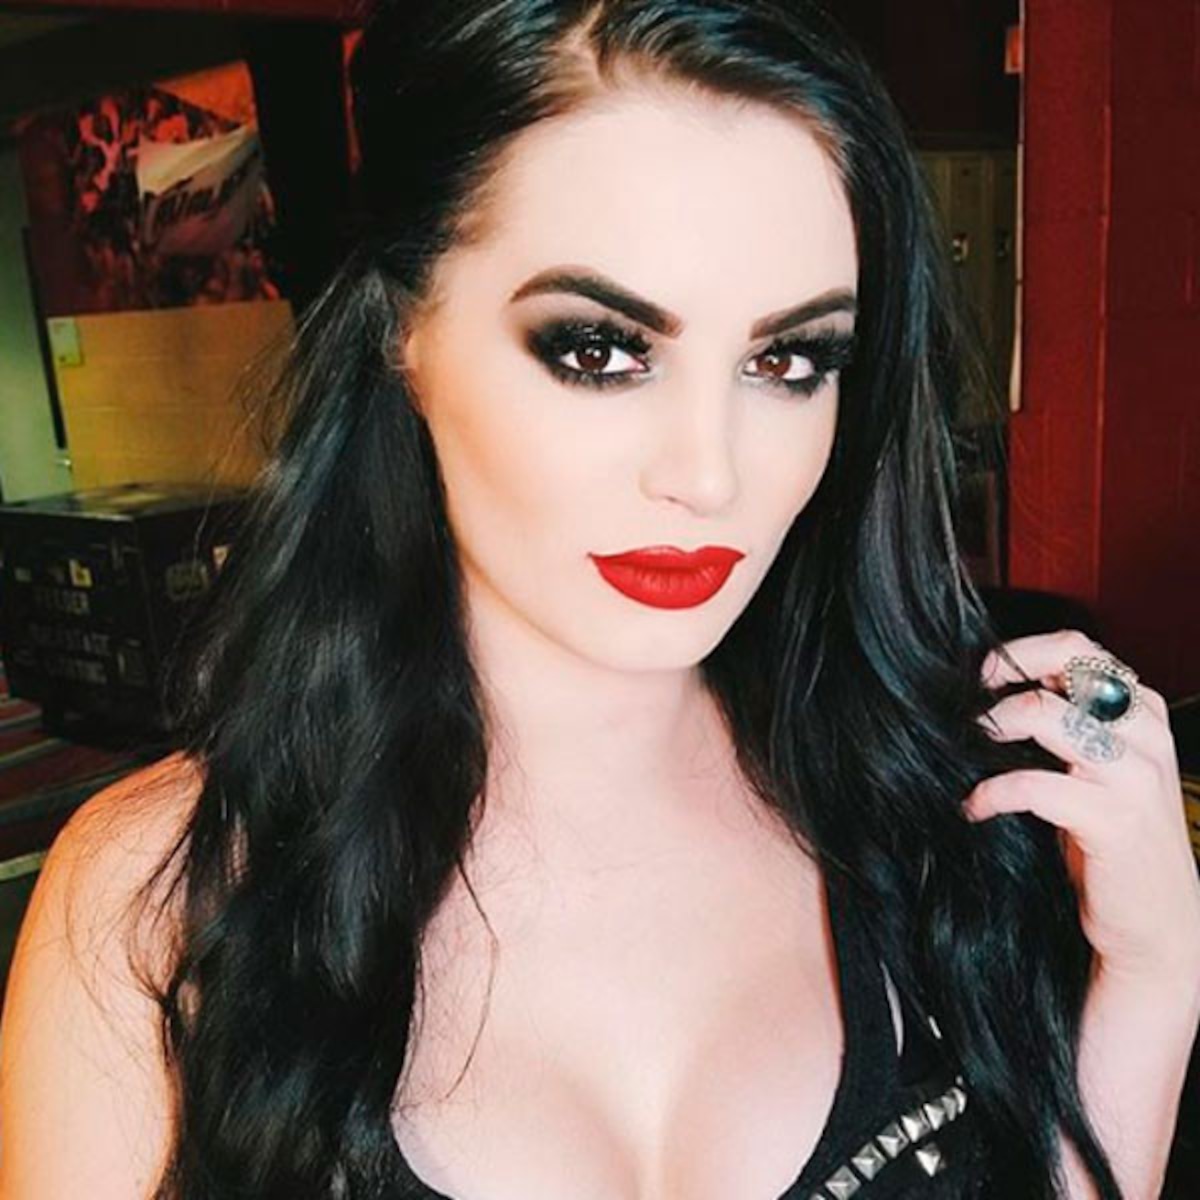 Wwe nudes paige 15 Hottest